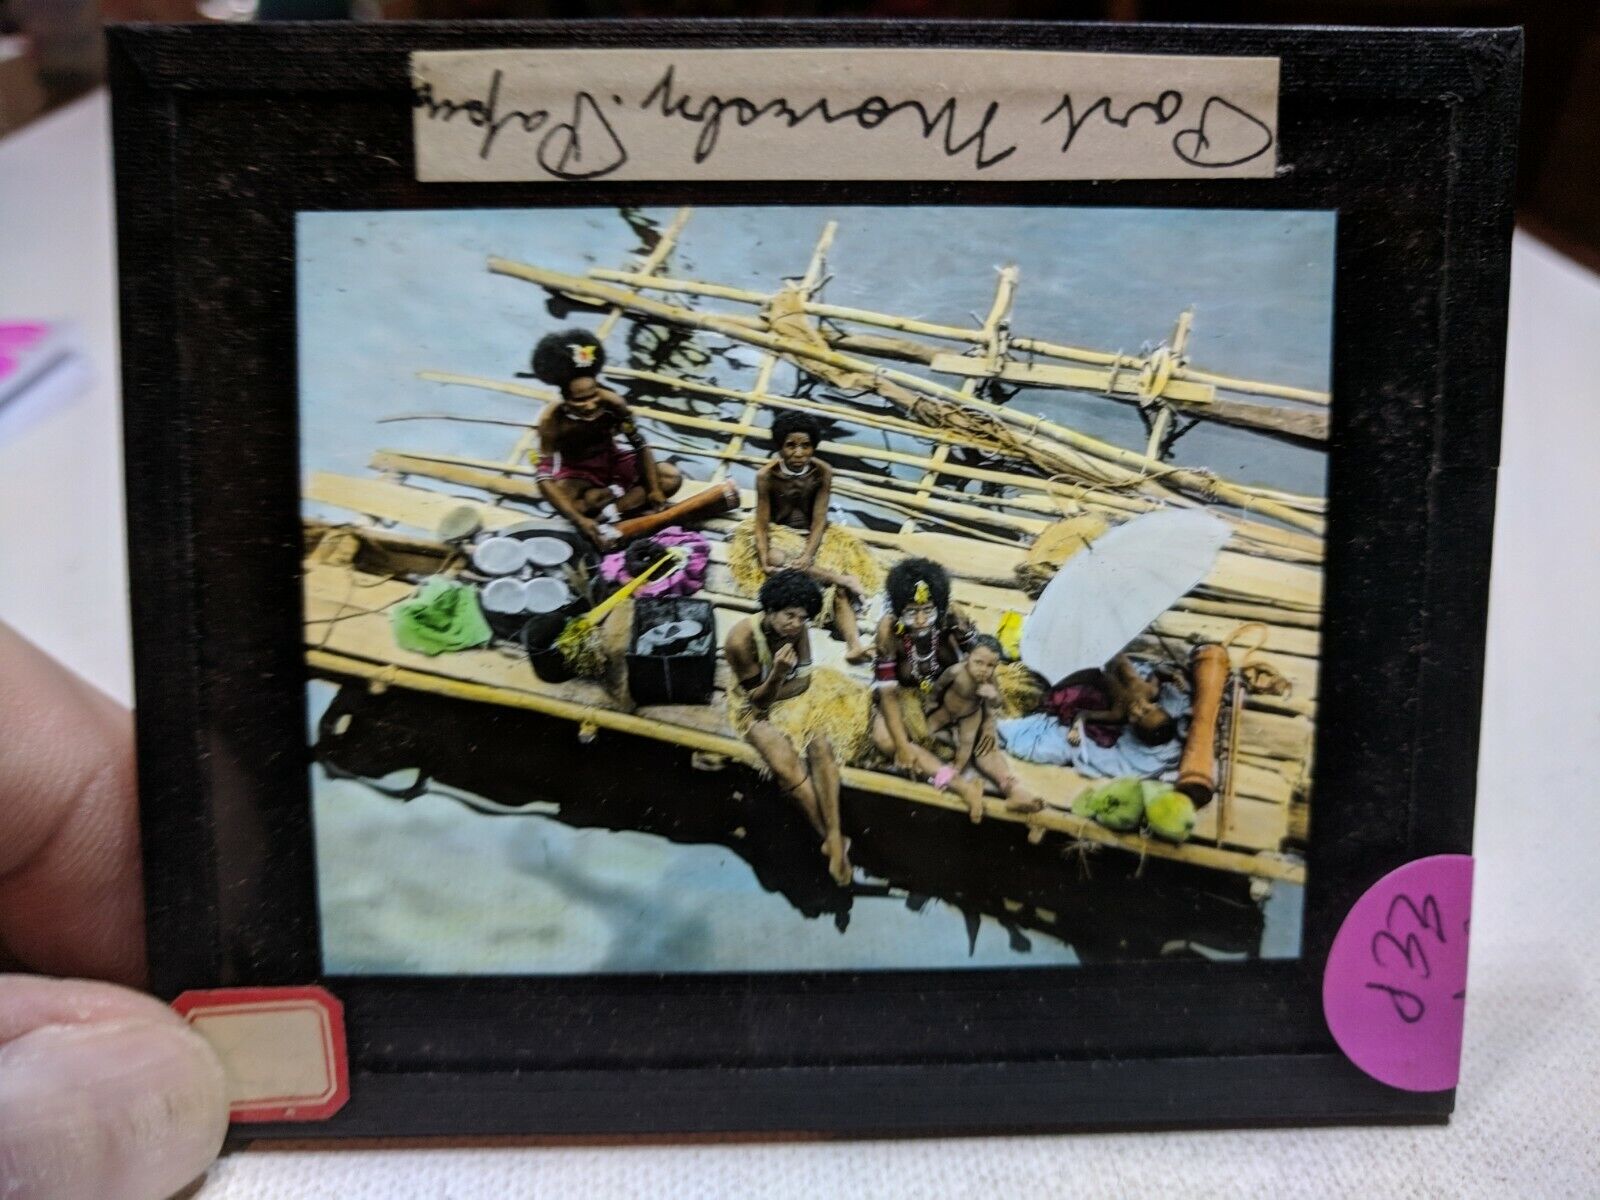 HISTORIC Colored Glass Magic Lantern Slide EEP Port MORESBY NATIVES From BOAT